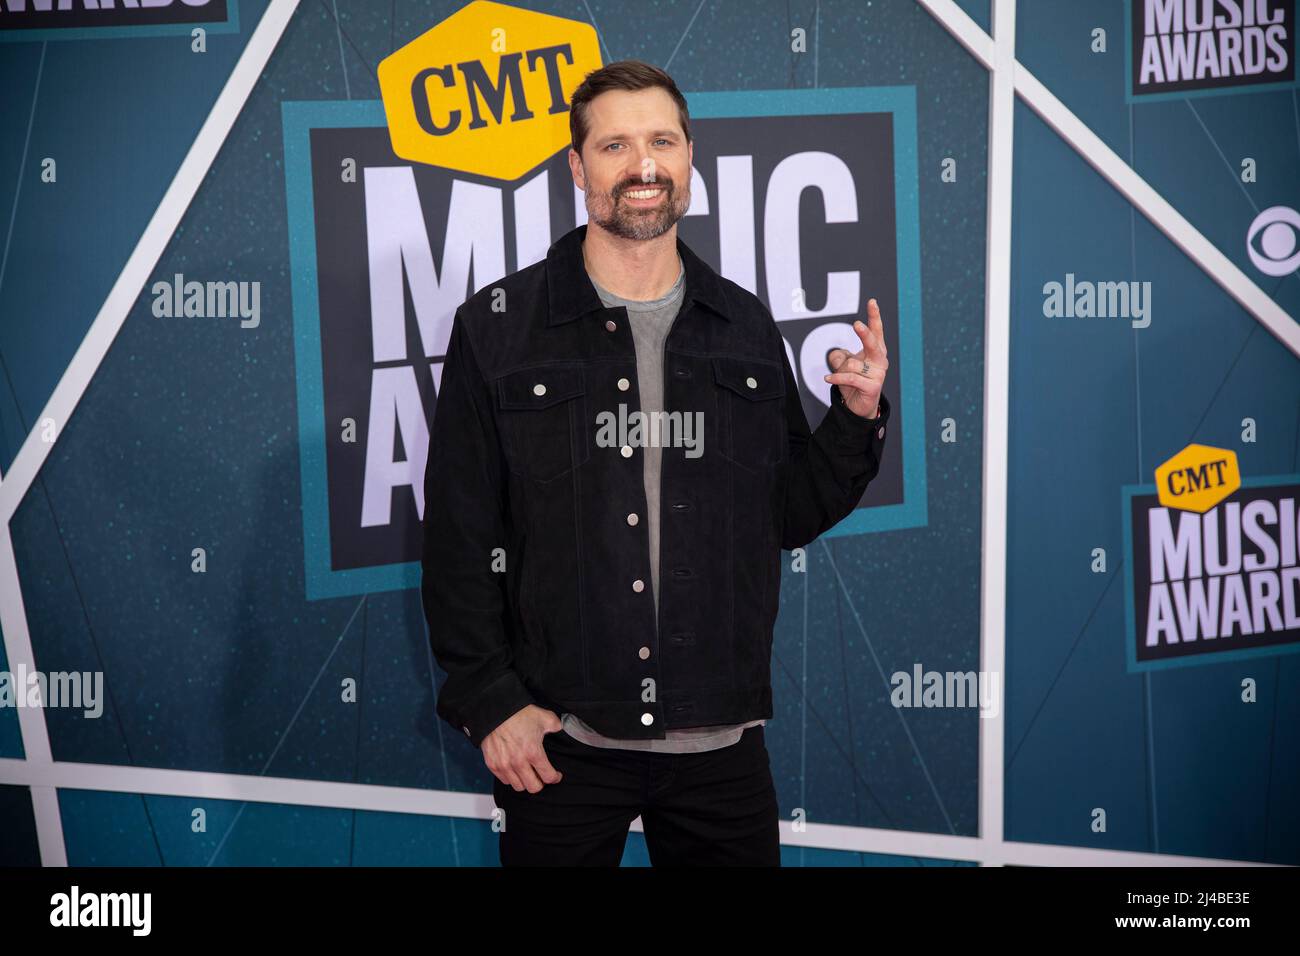 Nashville, Tenn. - April 11, 2022 Walker Hayes arrives at the red carpet for the 2022 CMT Awards on April 11, 2022 at Municipal Auditorium in Nashville, Tenn. Credit: Jamie Gilliam/The Photo Access Stock Photo